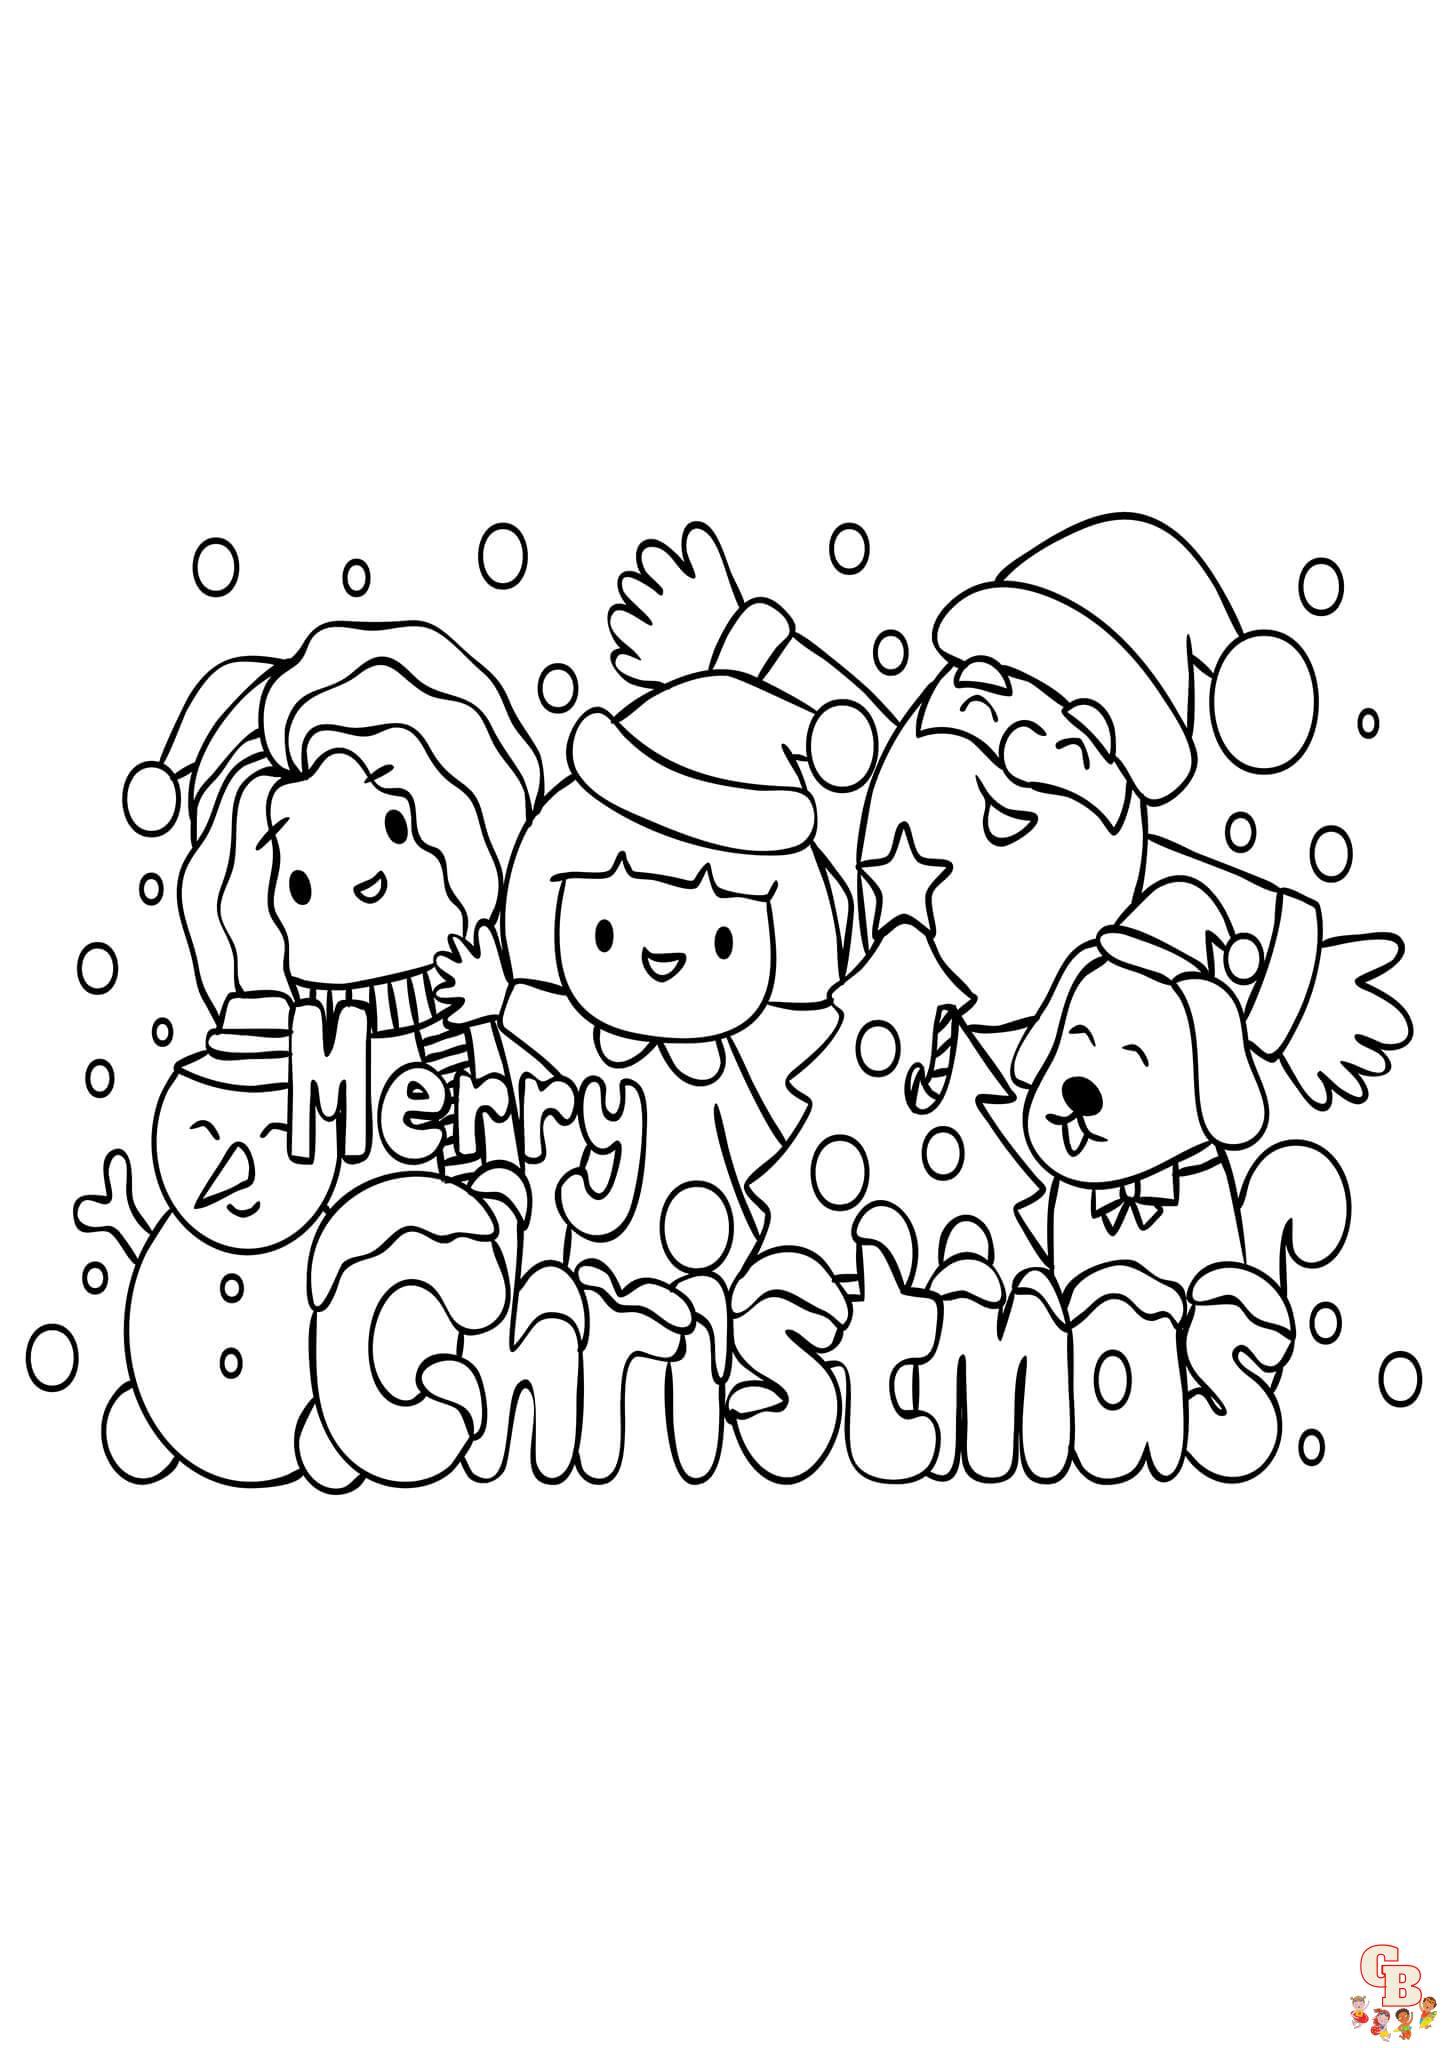 Easy Christmas coloring pages 5